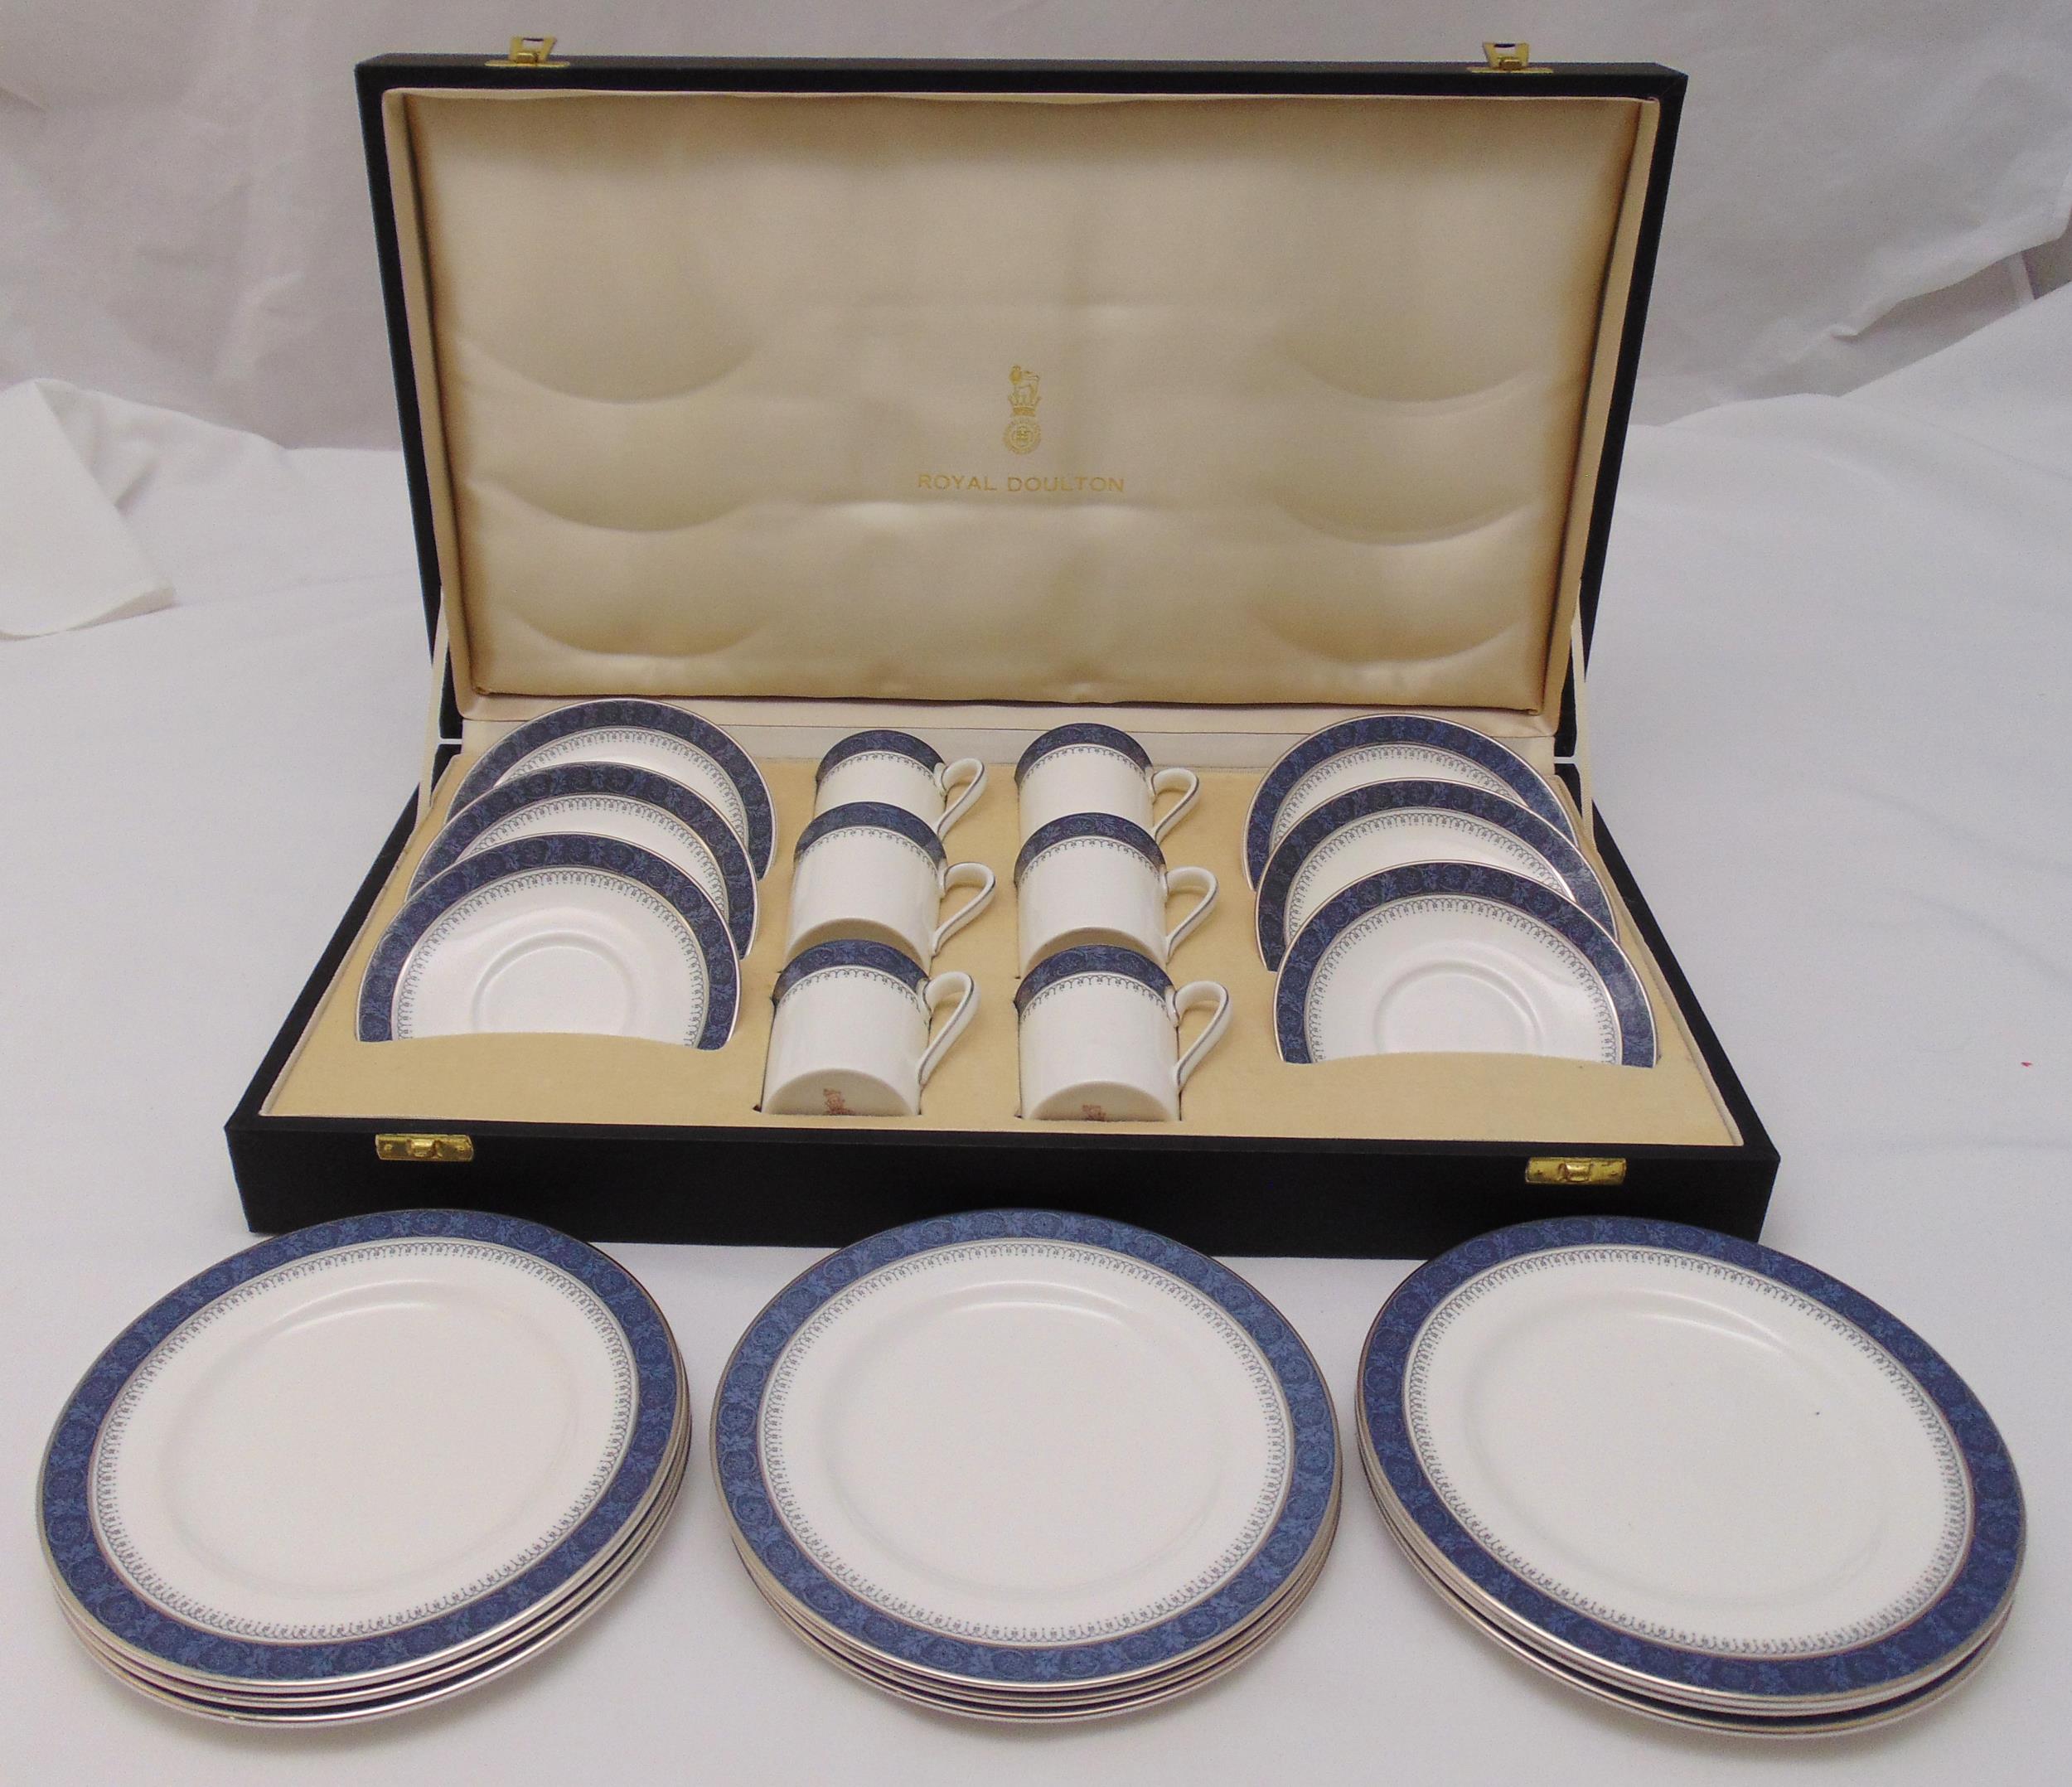 Royal Doulton Sherbrooke pattern H5009 fine bone china cased set of six coffee cups, saucers and